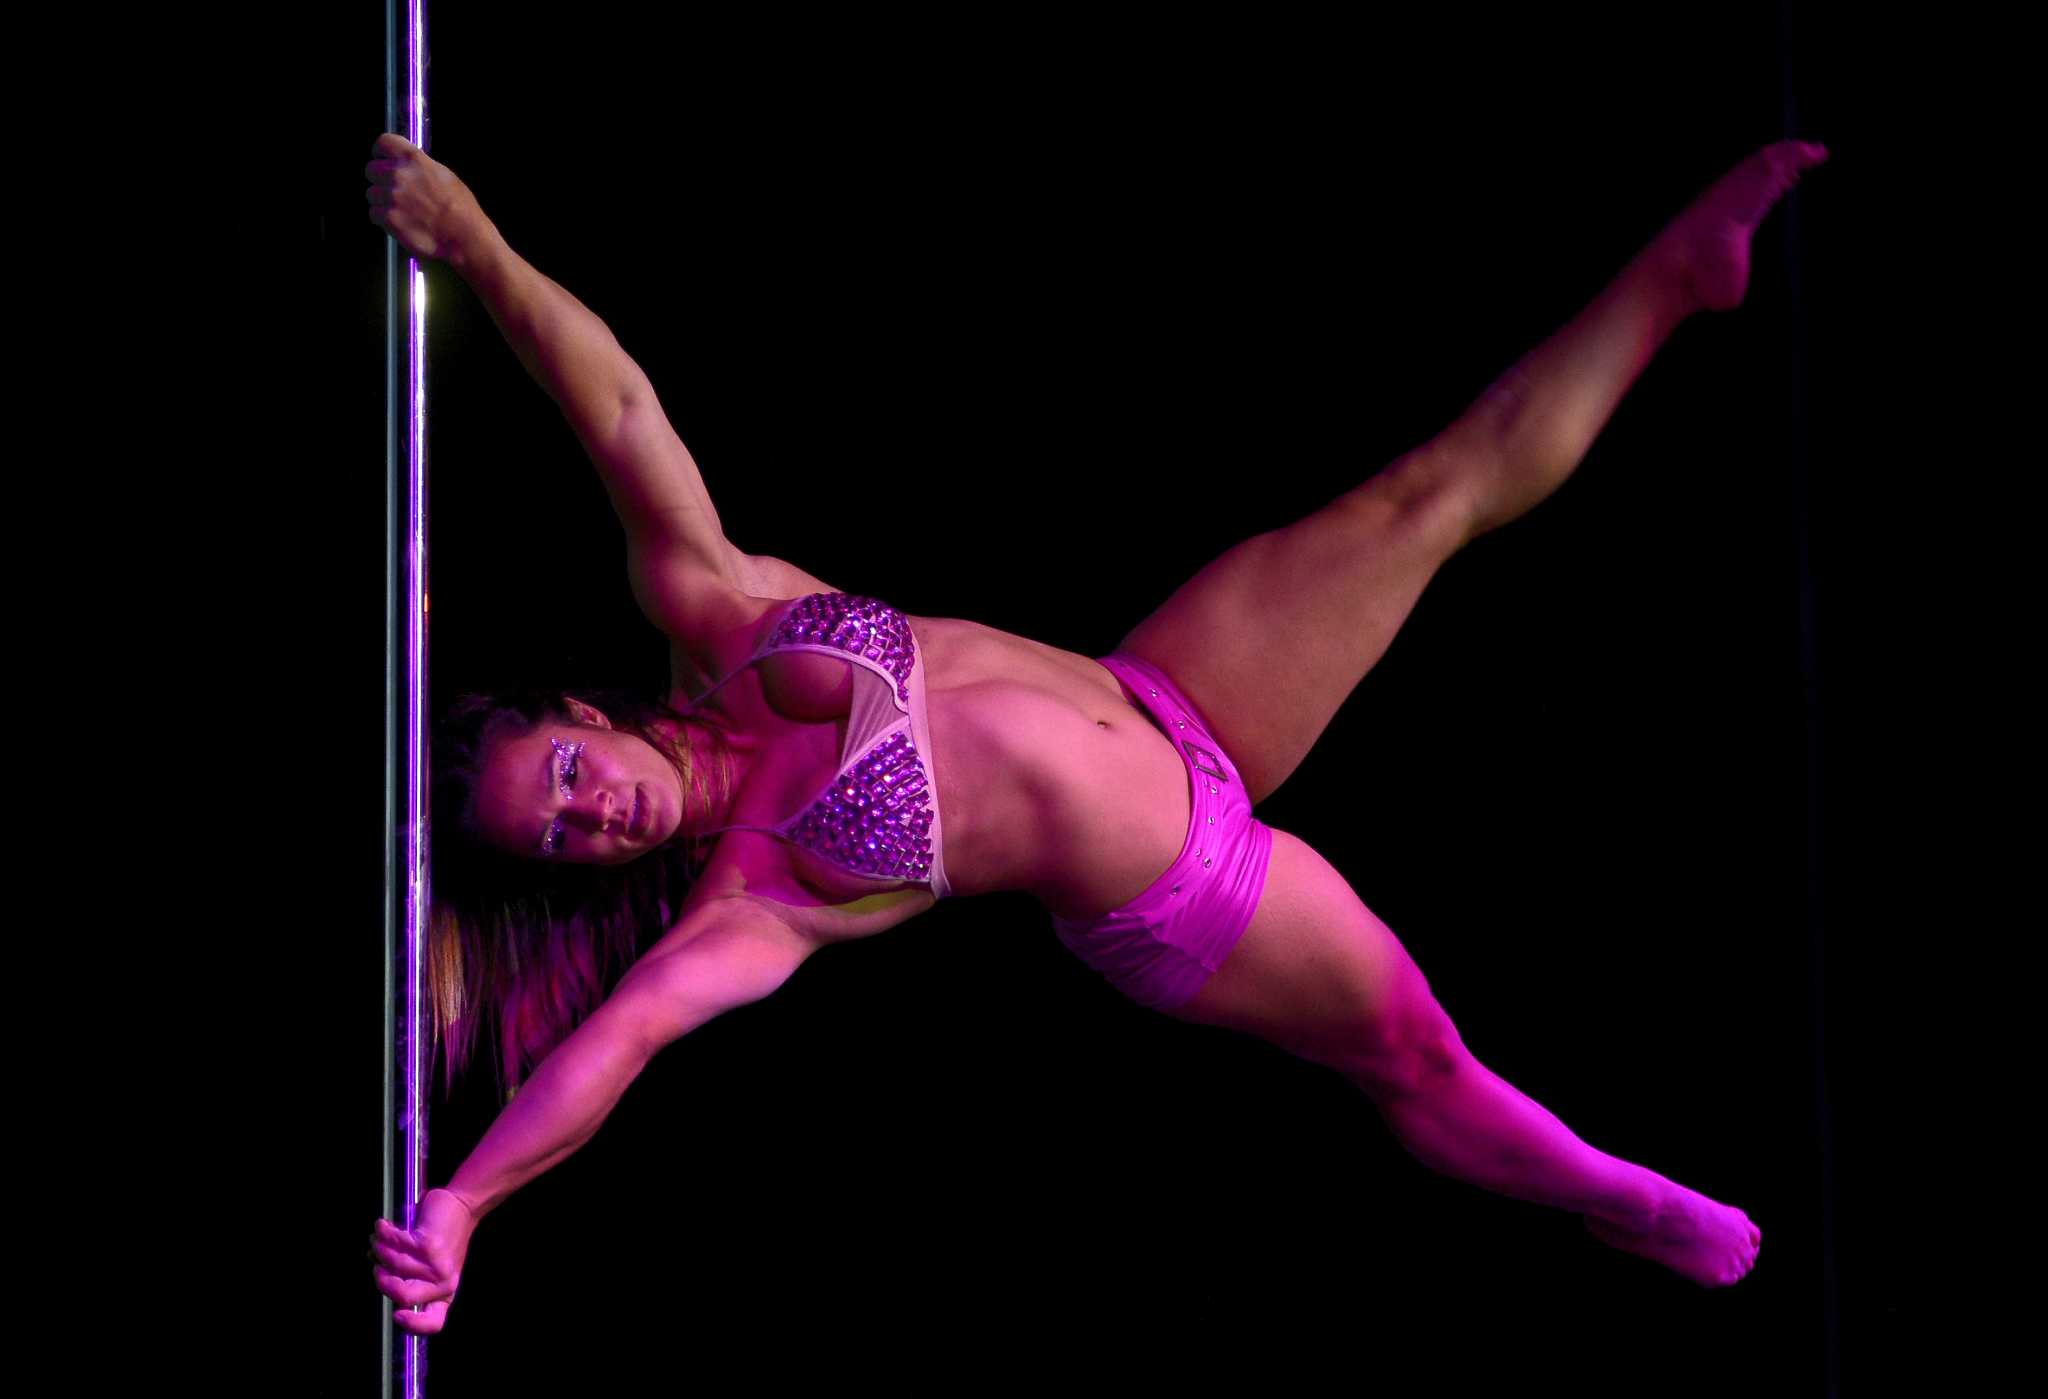 combined athletic prowess with sensuality in Buenos Aires for Pole Dance Ar...